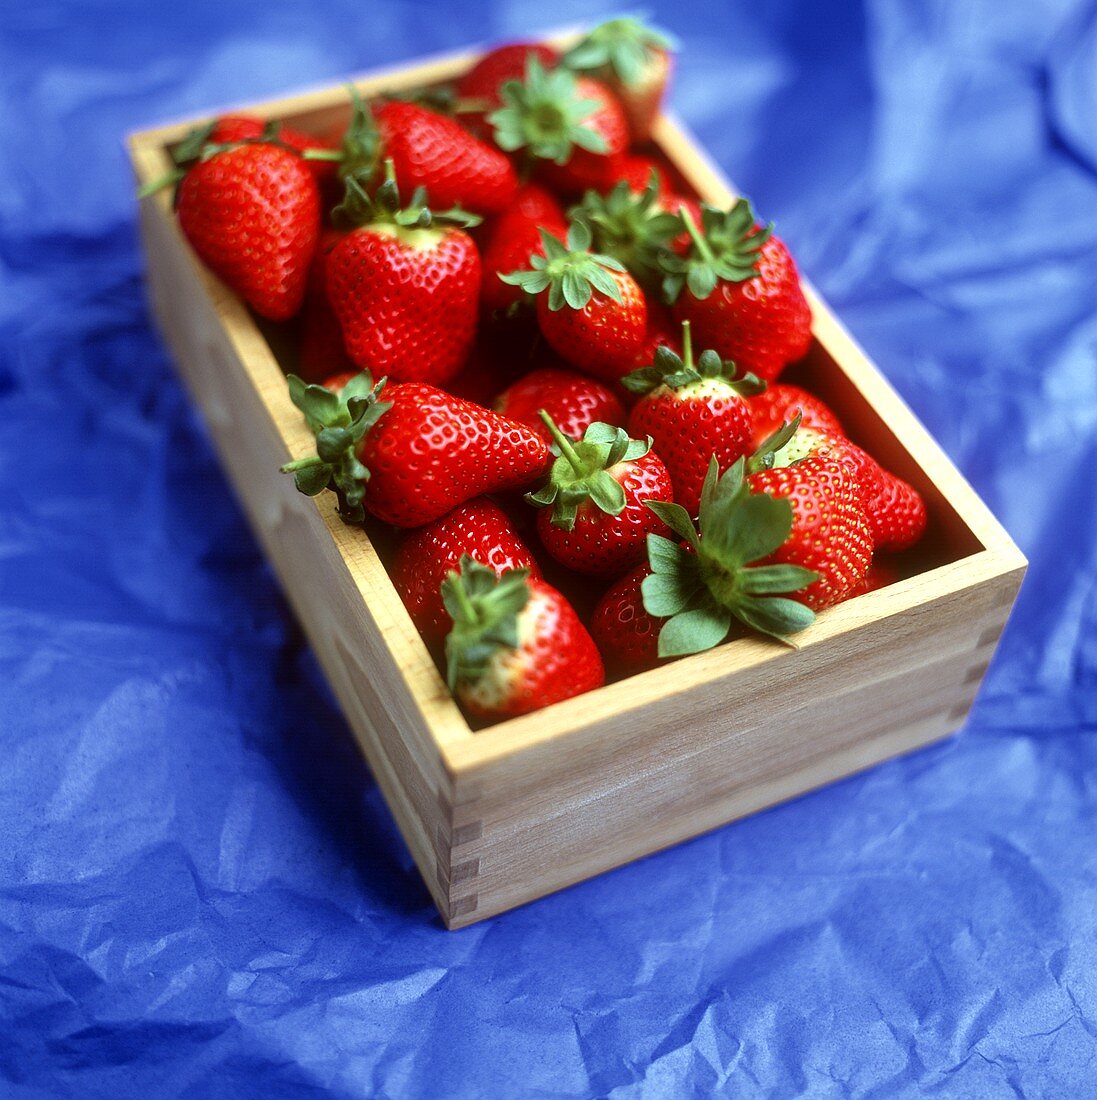 Strawberries in a wooden box on blue background